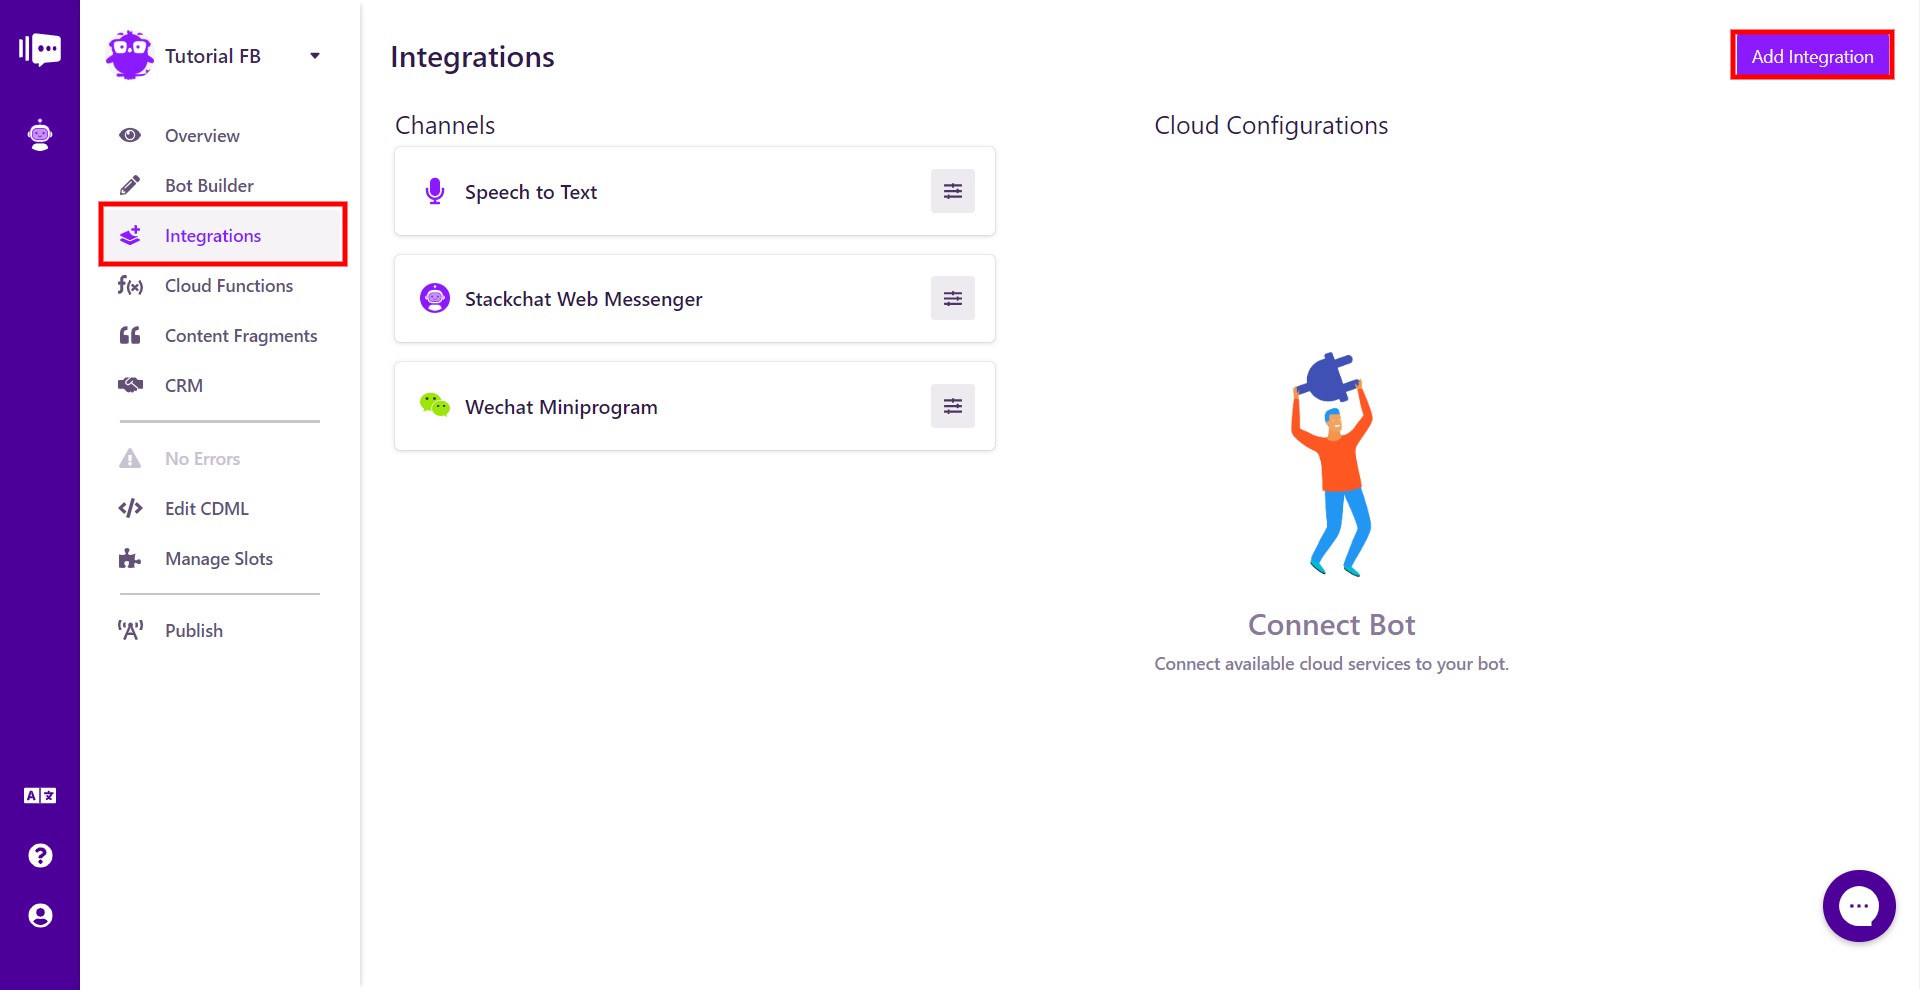 The Integrations Page